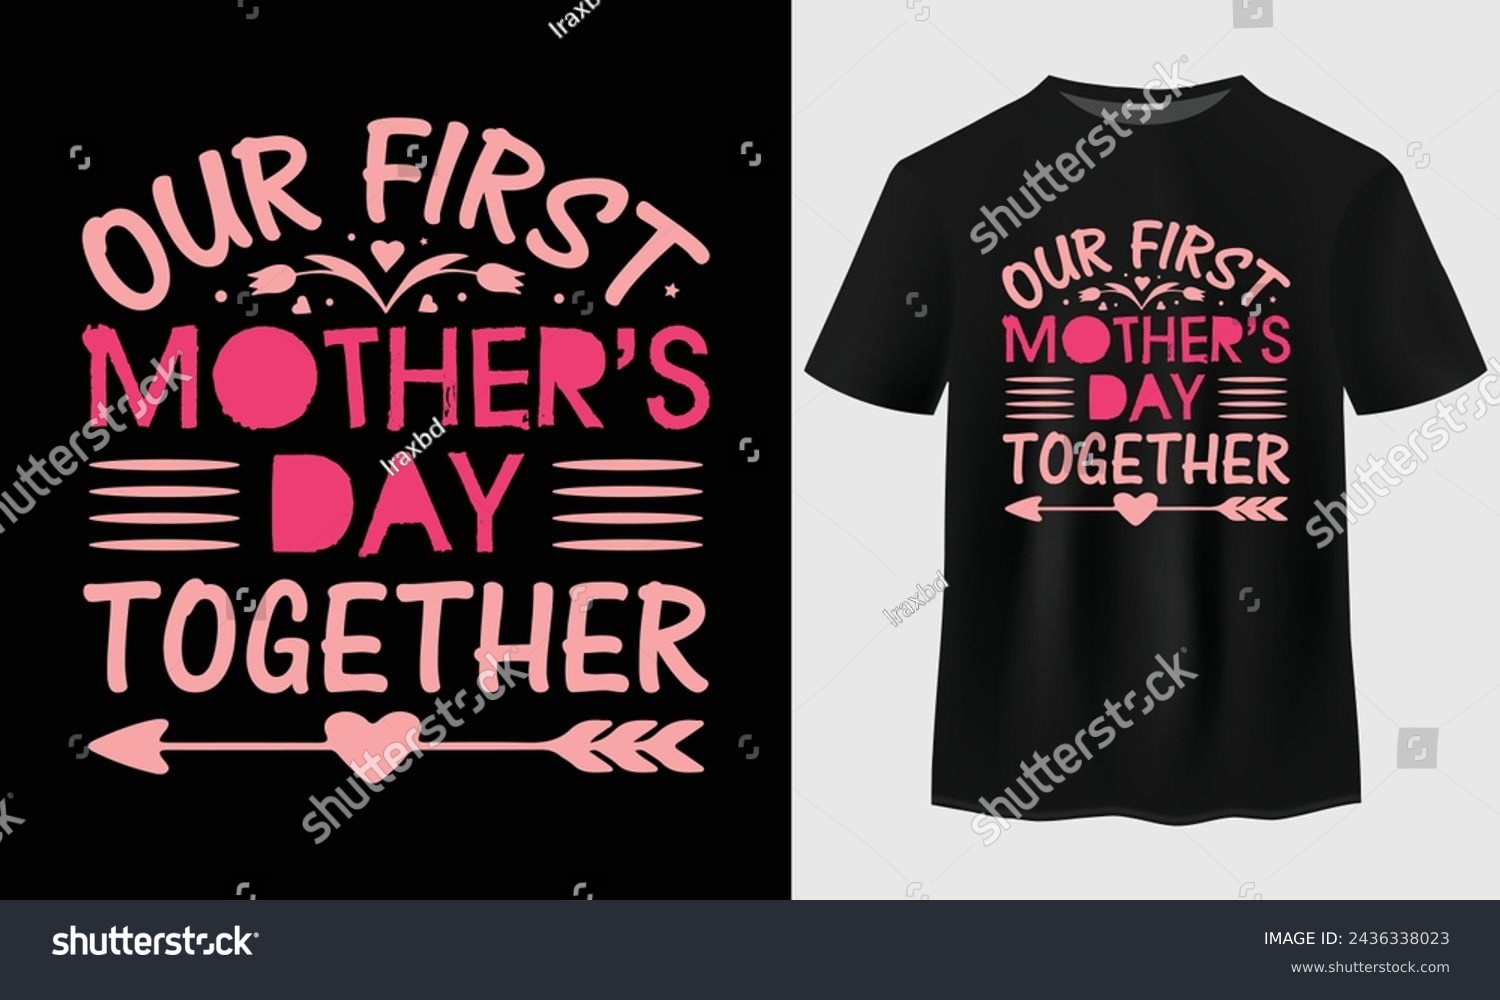 SVG of Our first mother's day together t-shirt design. Mother's day gift. mother's day stickers.  svg